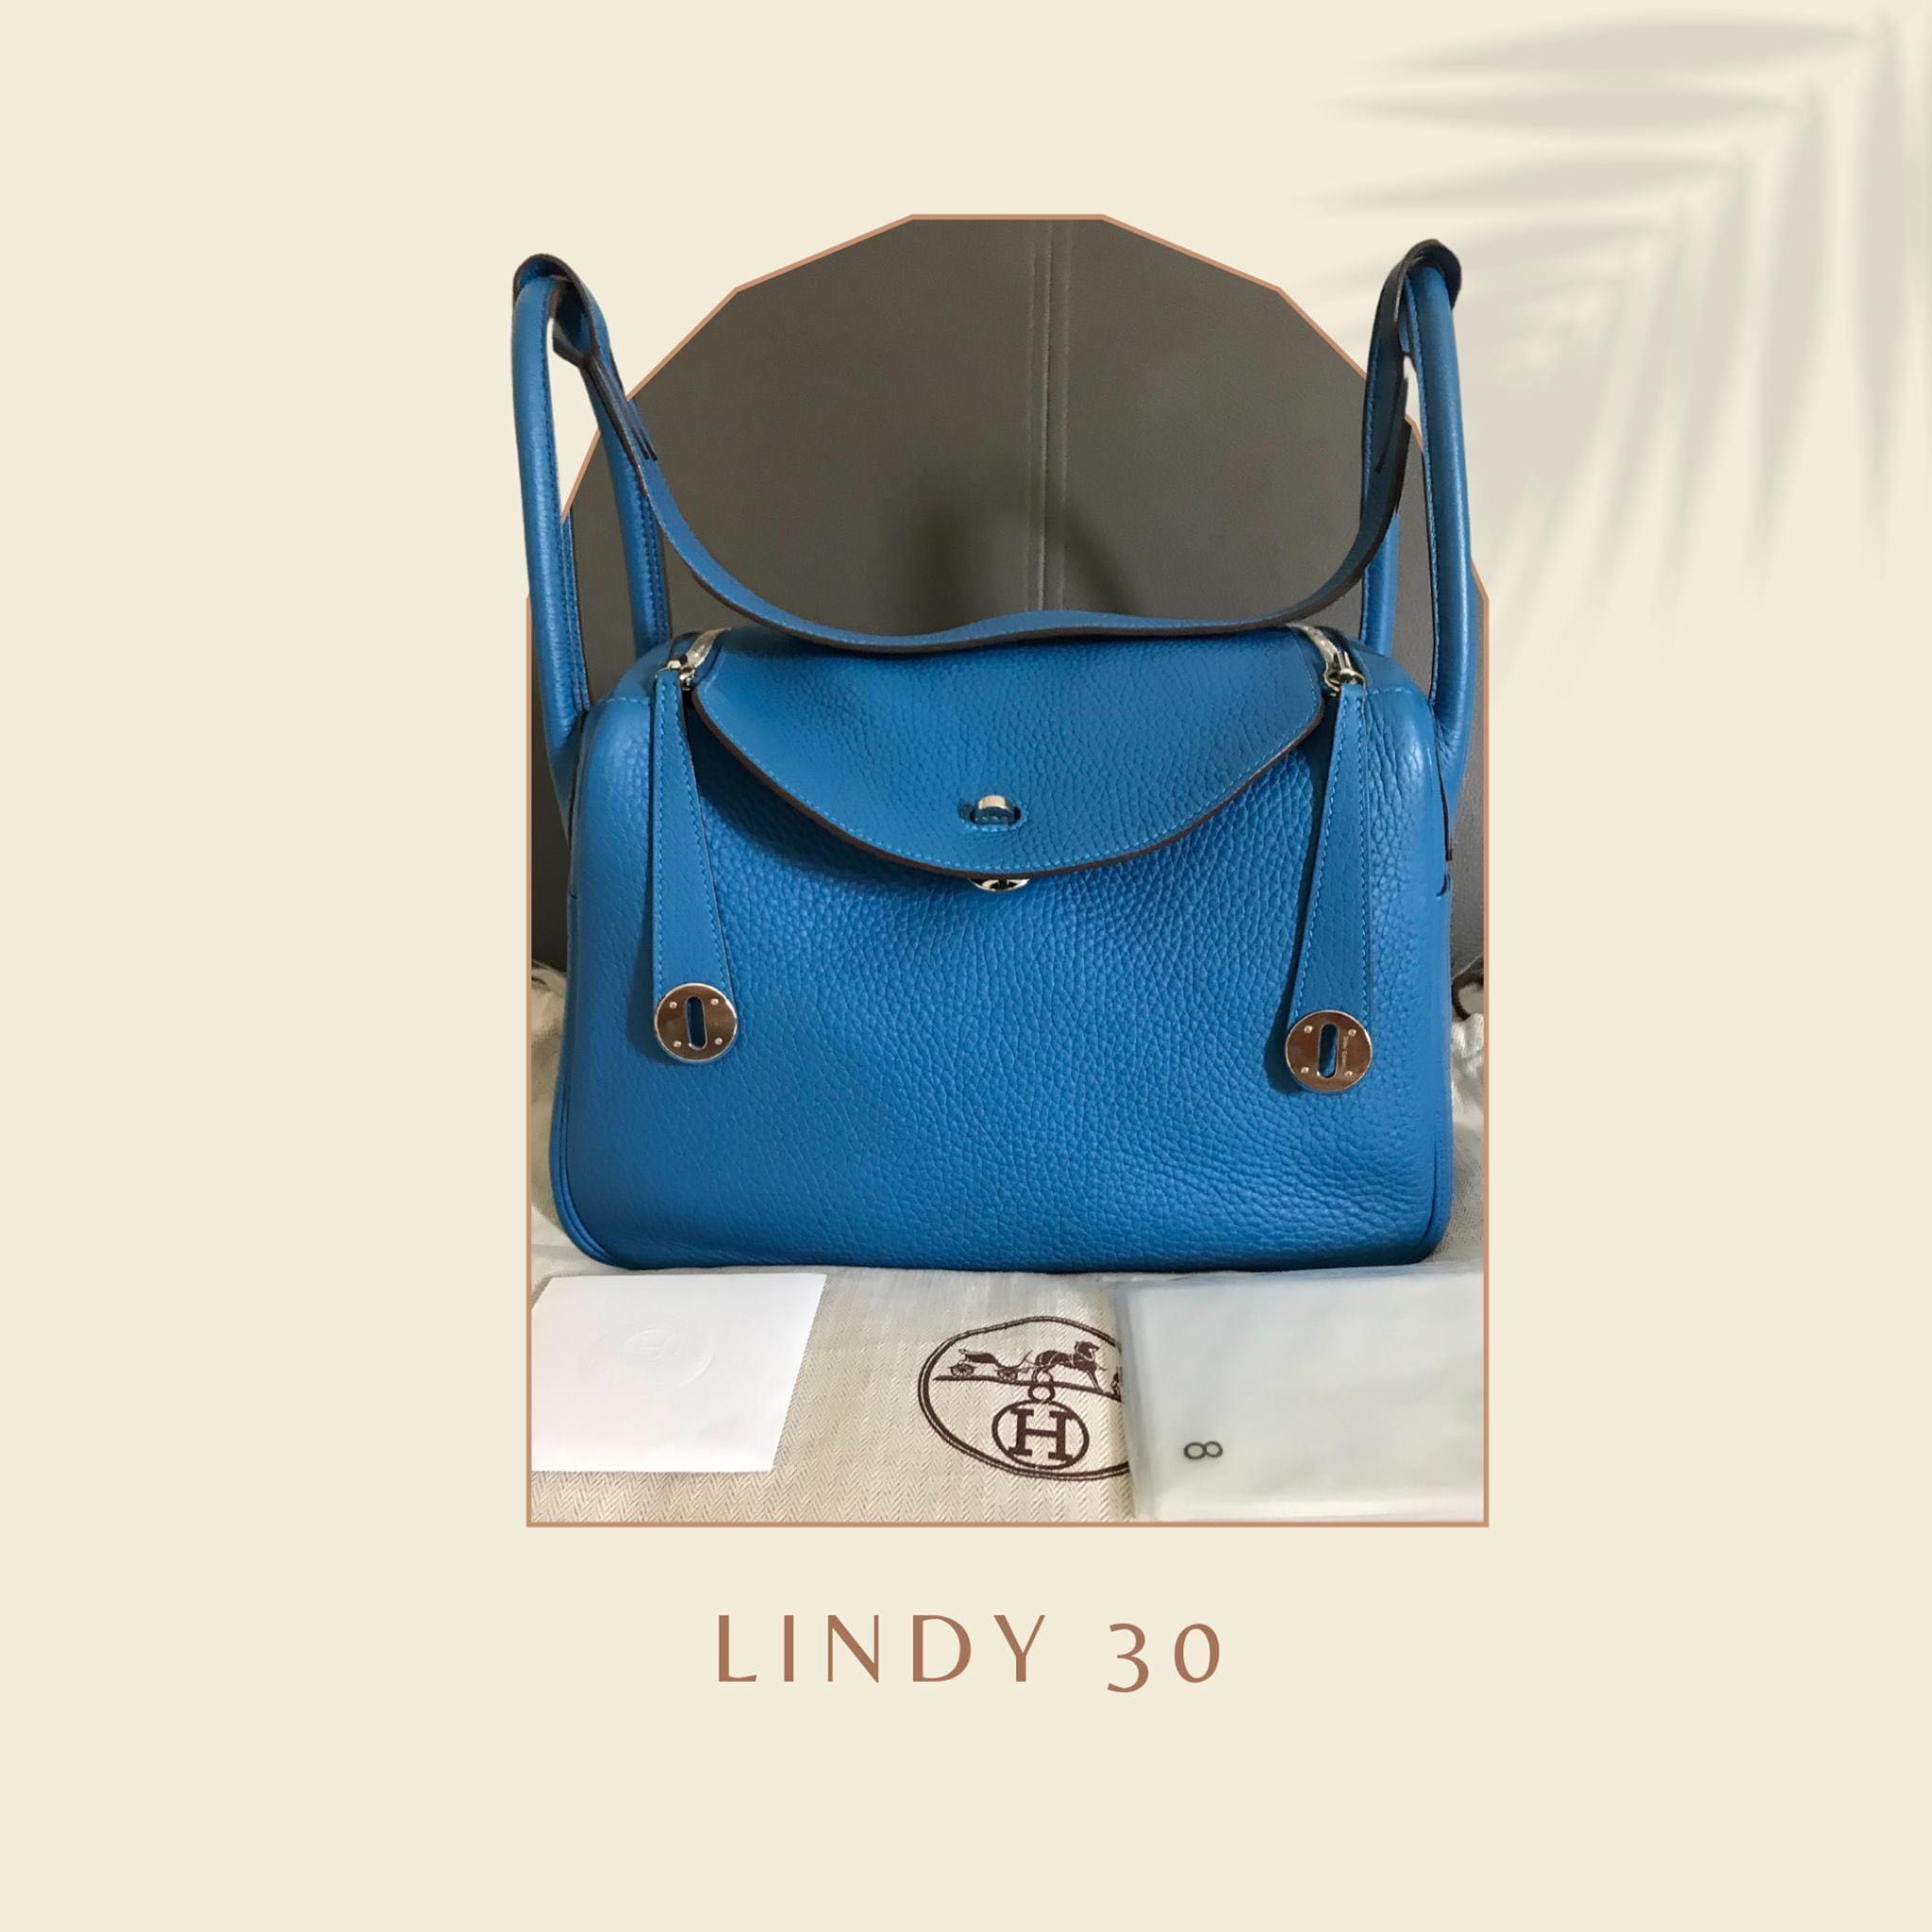 Preloved hermes lindy 30 blue lin. Contact us for details. #lindy30bluelin  #hermeslindy30bluelin #lindybluelin, By Italy Station 意大利站